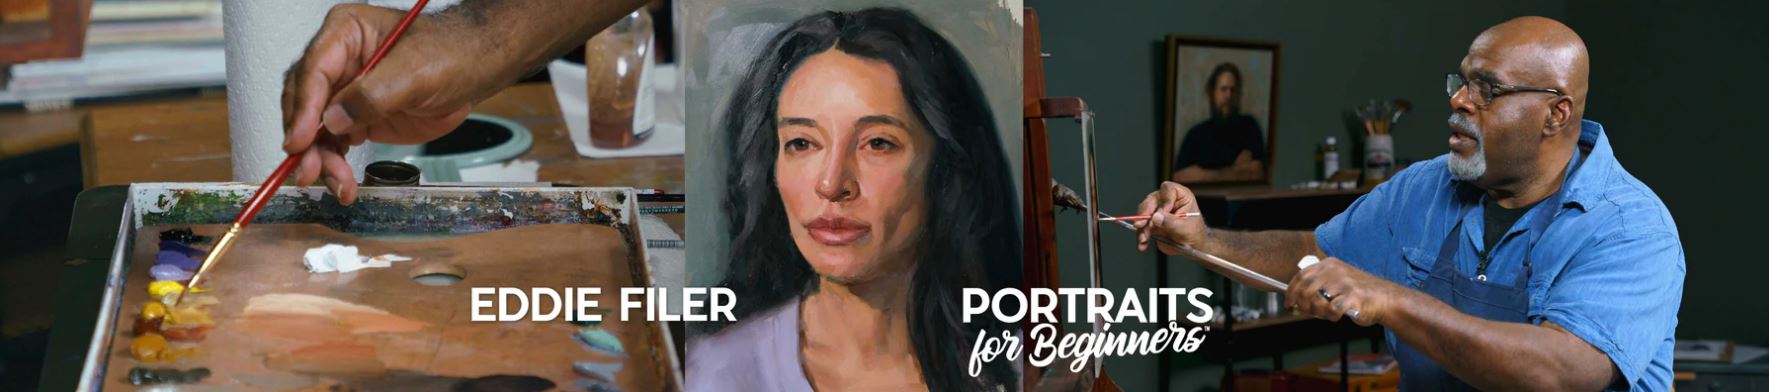 Portraits for Beginners